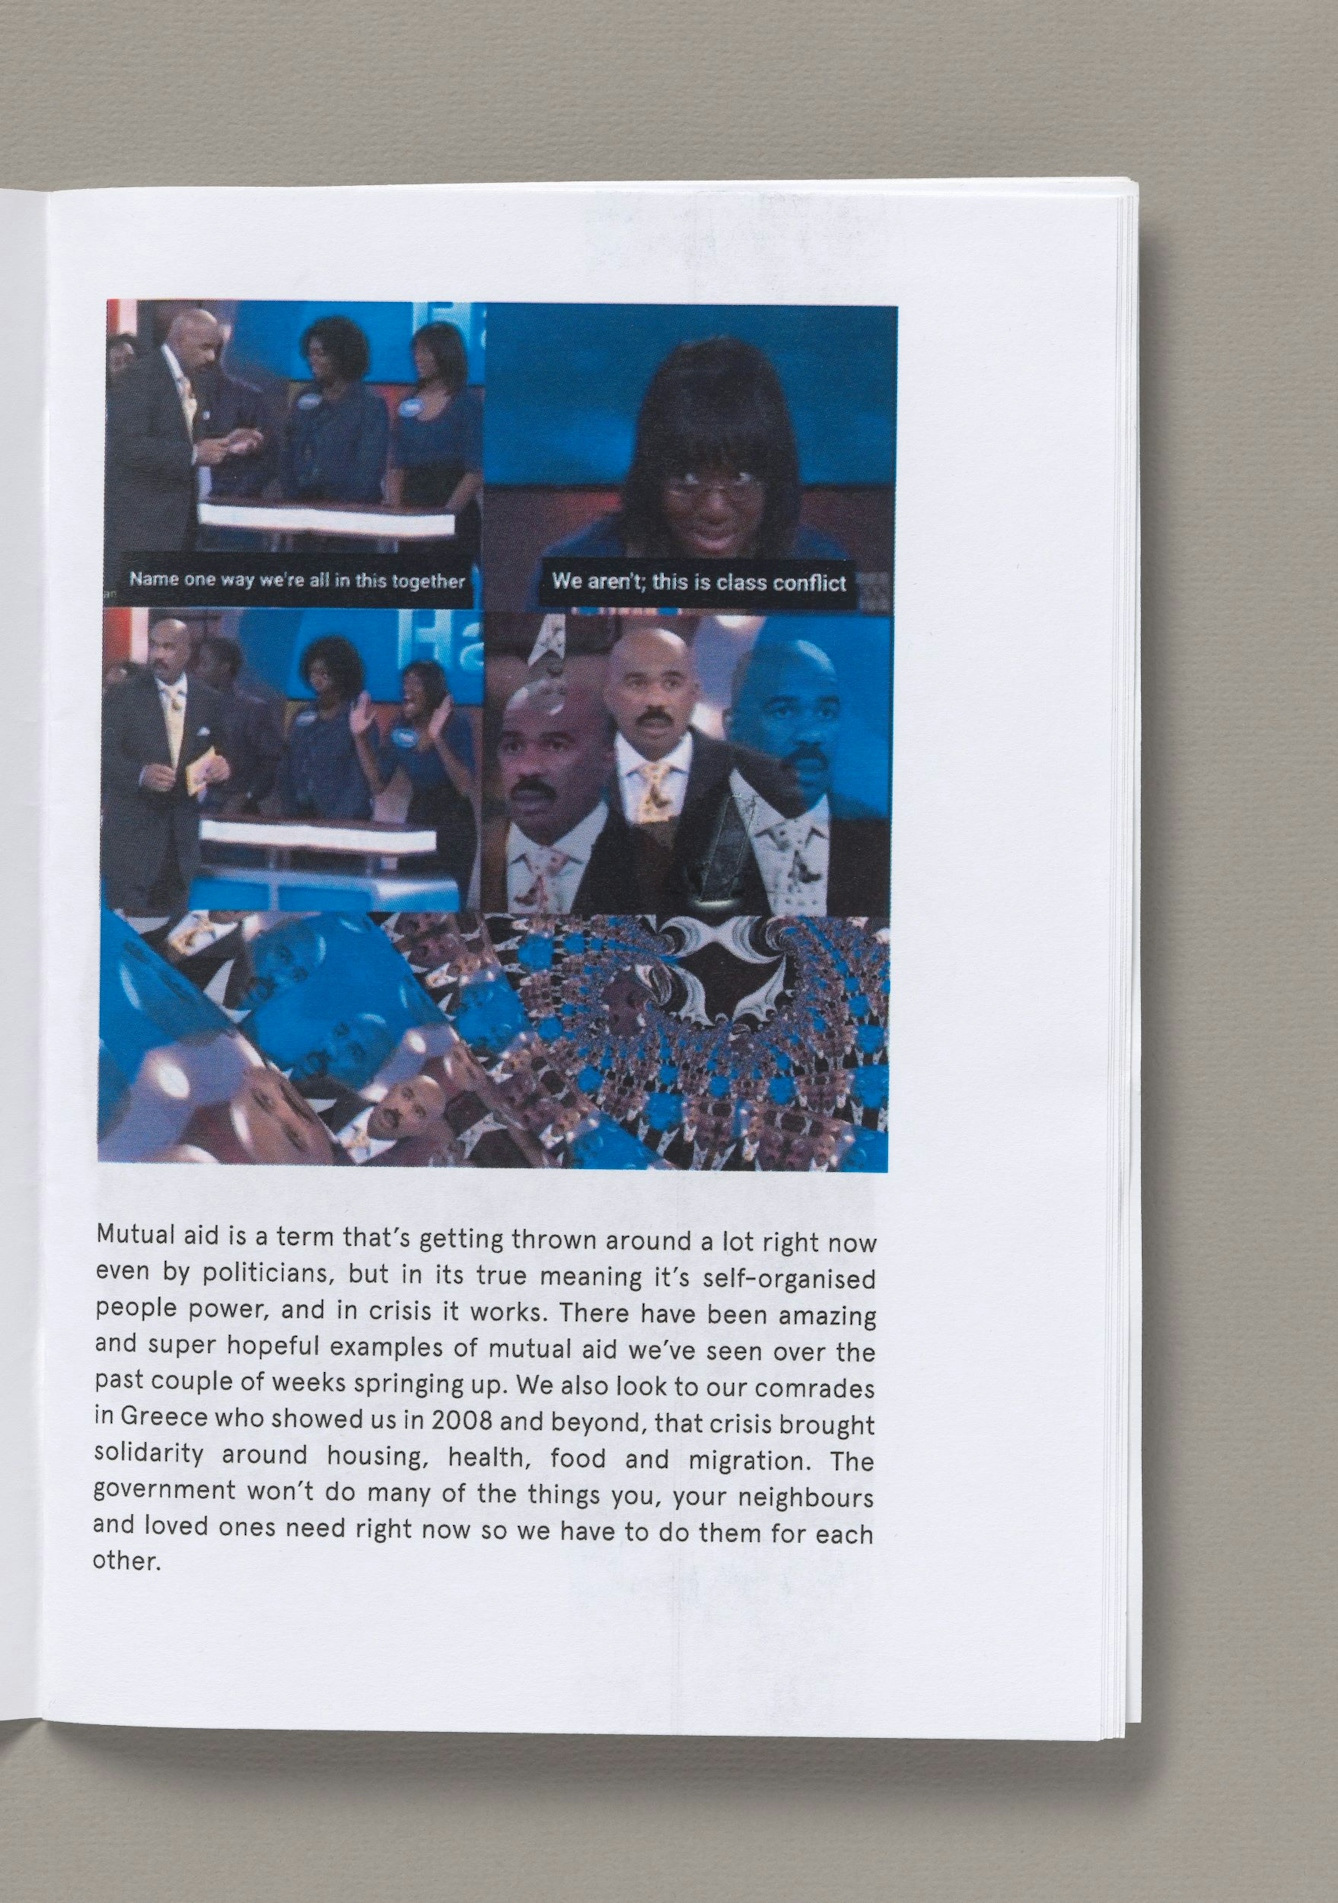 Page from the zine 'Physically distant, connected by care : towards collective resilience and strength during the COVID-19 pandemic' by Power Makes Us Sick. The top two thirds of the page are a collage of screen shots of an online meme from a TV gameshow in which a bald black man holding a microphone stands infront of a row of black contestants. The text below two or the panels says "Name one way in which we are all in this together" "We aren't this is a class conflict". The bottom third of the page is a typed text about mutual aid.